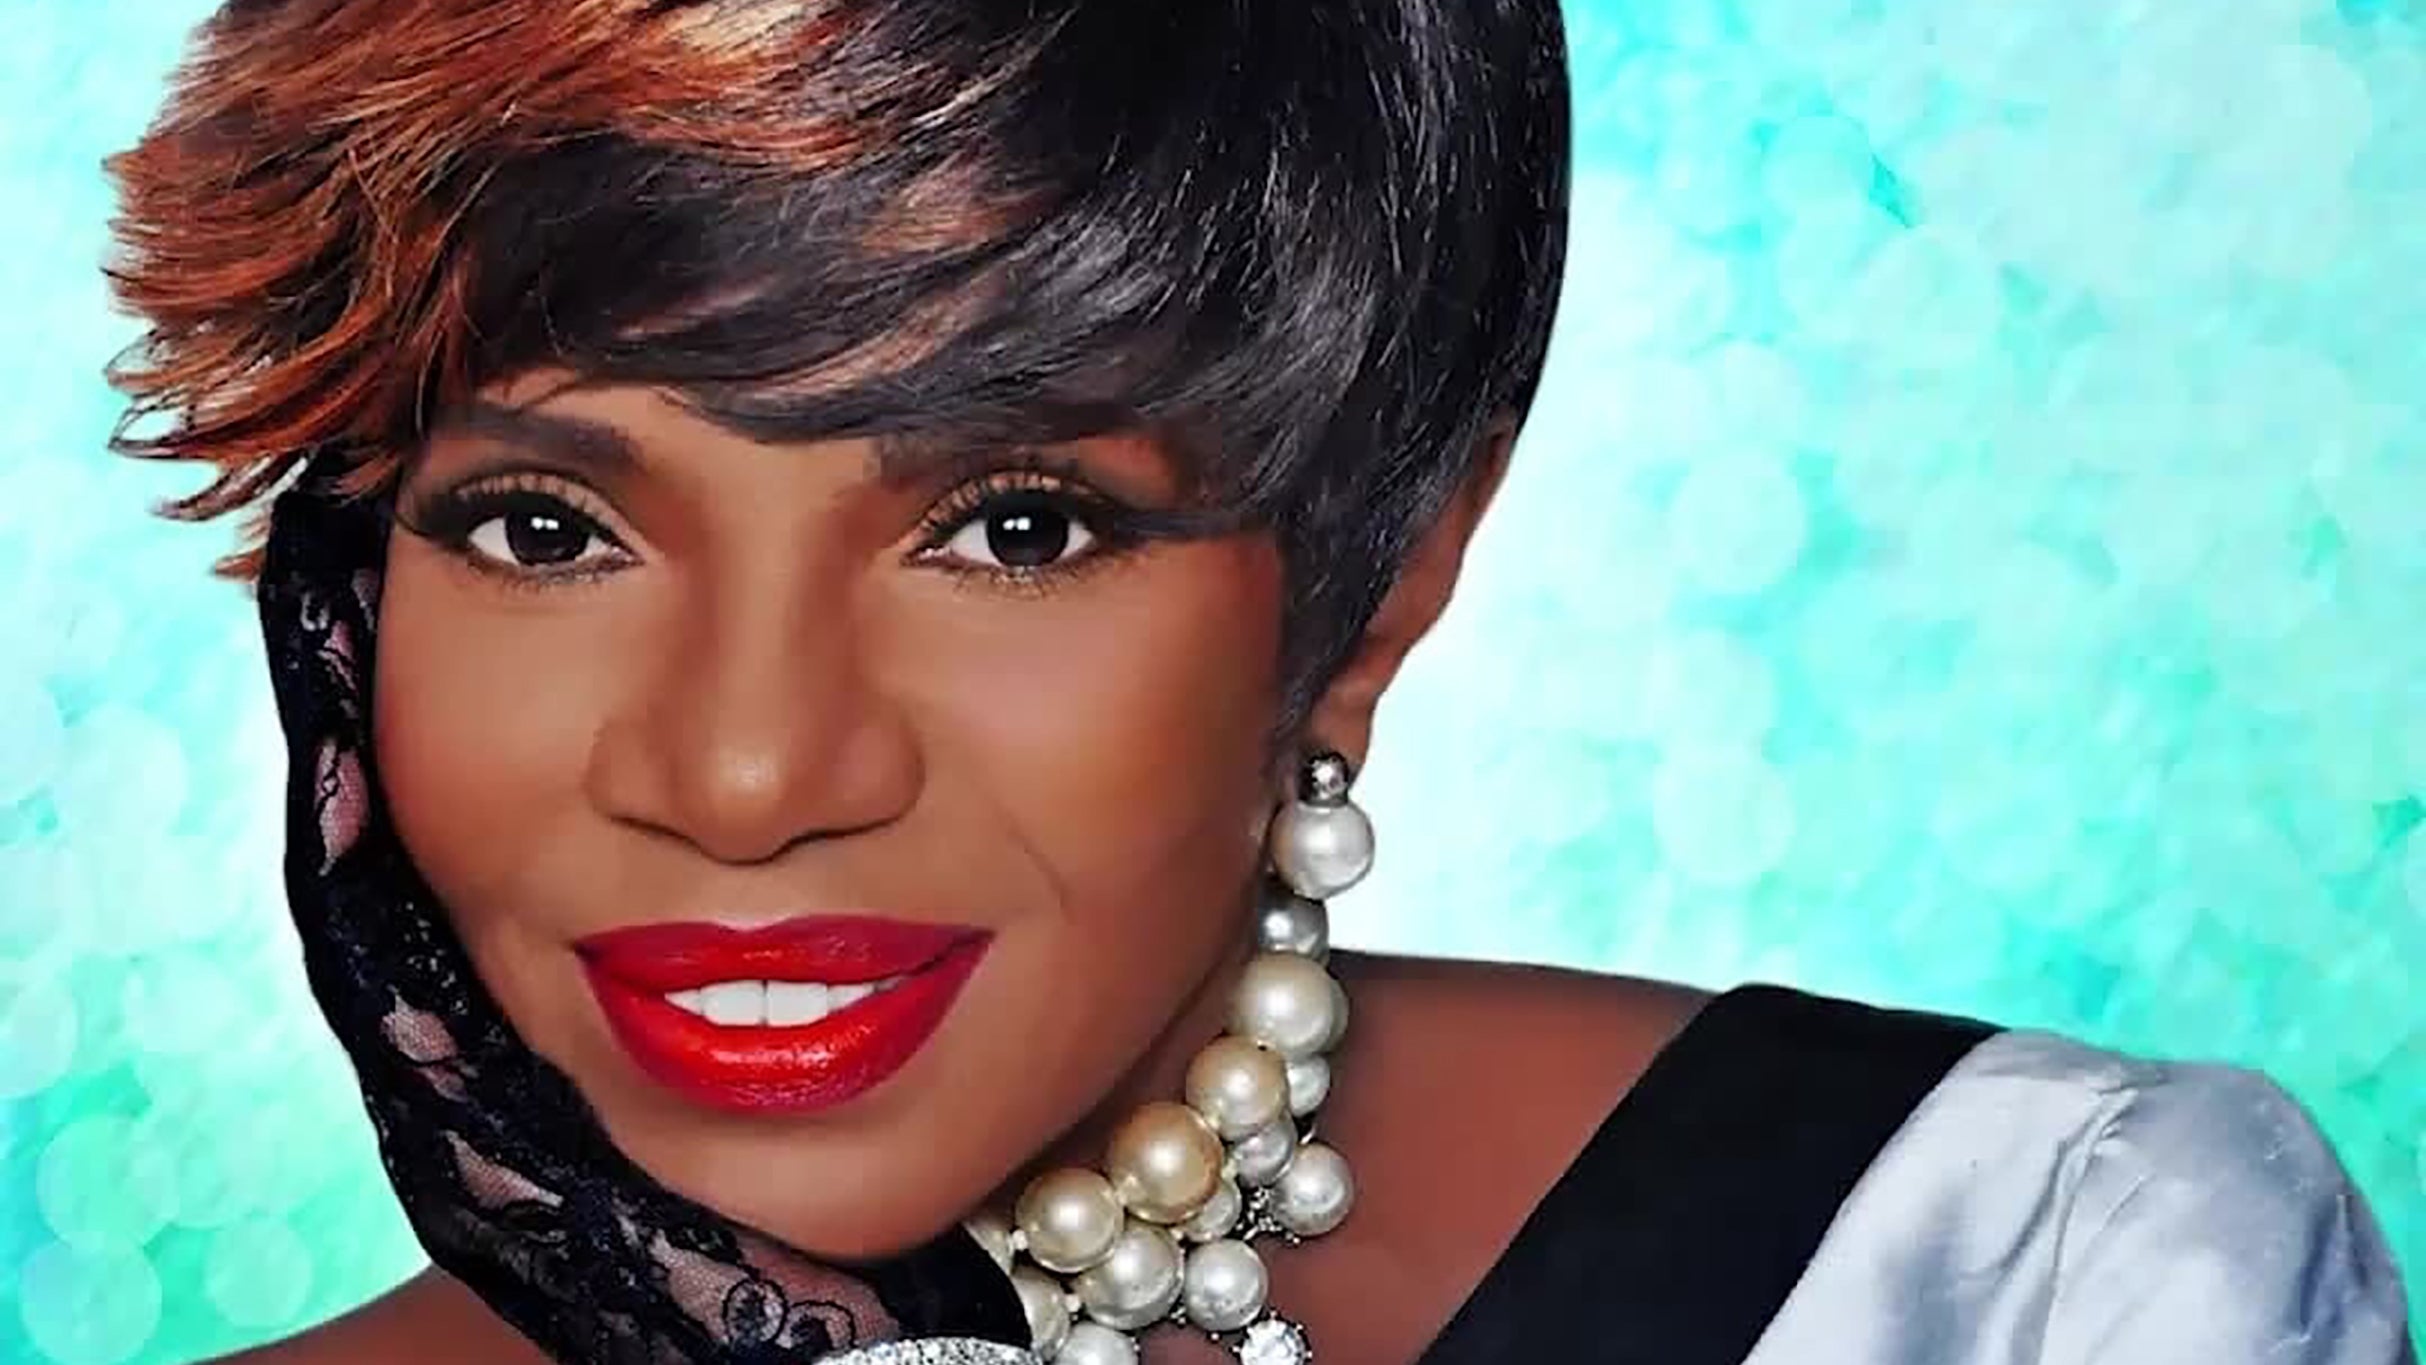 A Night Of Classic R&B W/ Melba Moore, Alexander O'Neal, Lillo Thomas  in Westbury promo photo for Live Nation presale offer code